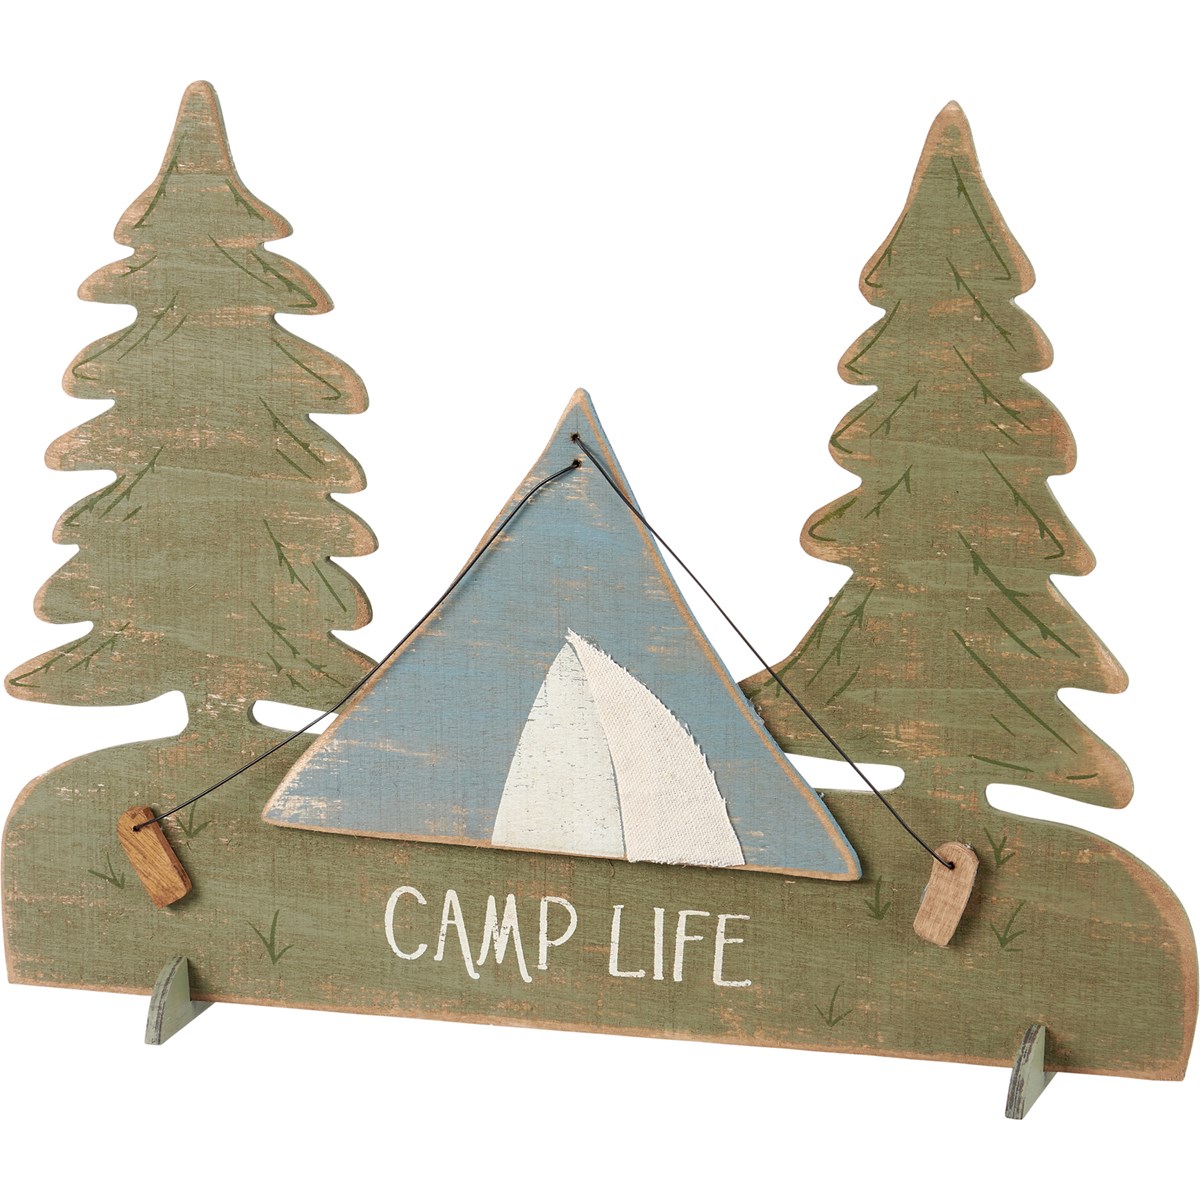 Camp Life Wall Decor - Wood, Wire, Fabric